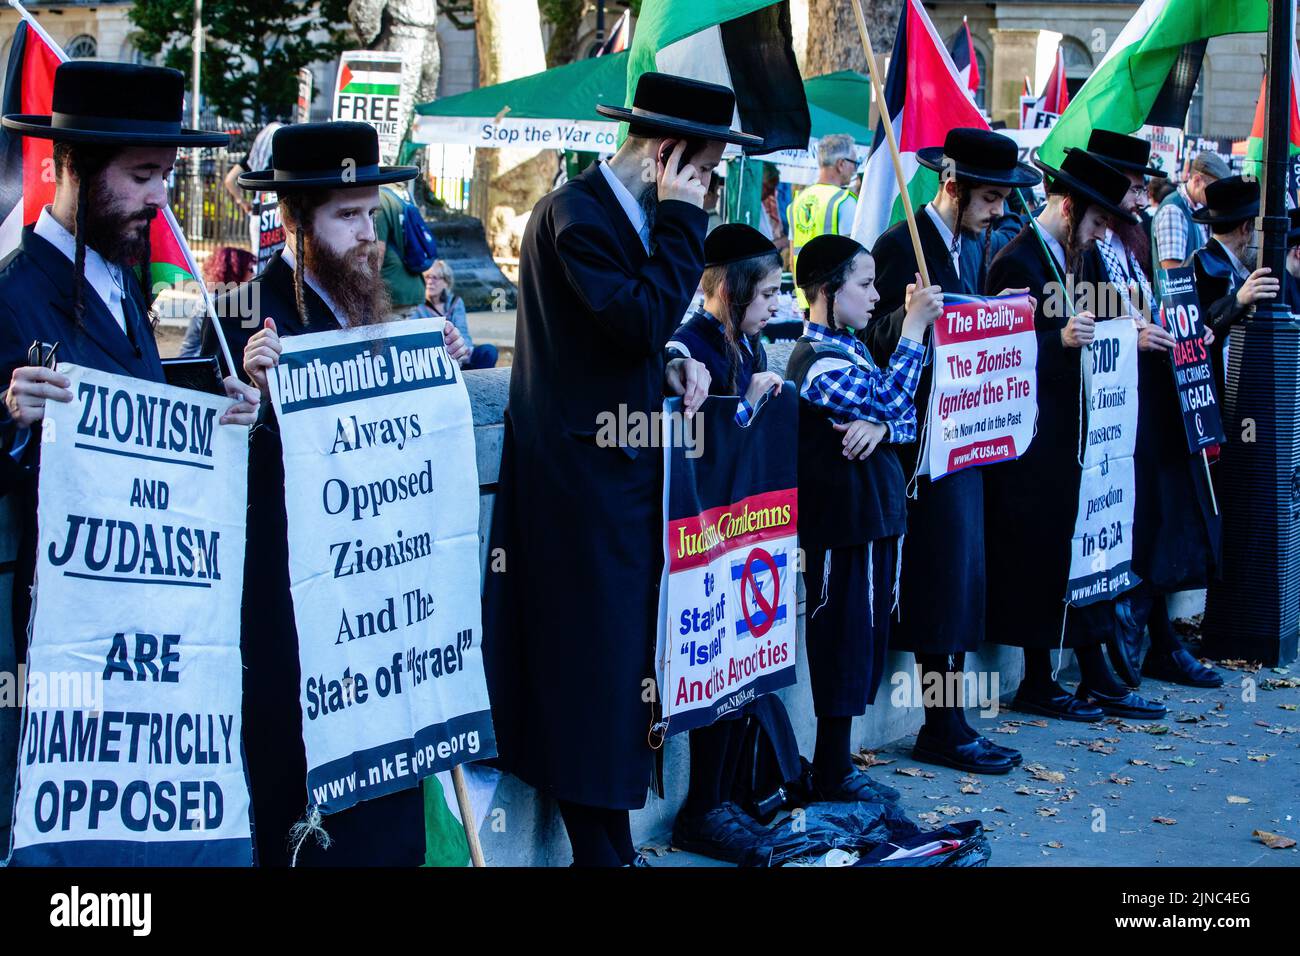 London, UK. 10th August 2022. Members of Neturei Karta, a group of ultra-Orthodox Jews which campaigns against Zionism, hold signs criticising the state of Israel at a Rally for Palestine opposite Downing Street. At least 47 Palestinians, including 16 children, were killed and hundreds more injured during a three-day bombardment of Gaza by Israeli forces named Operation Truthful Dawn. Credit: Mark Kerrison/Alamy Live News Stock Photo